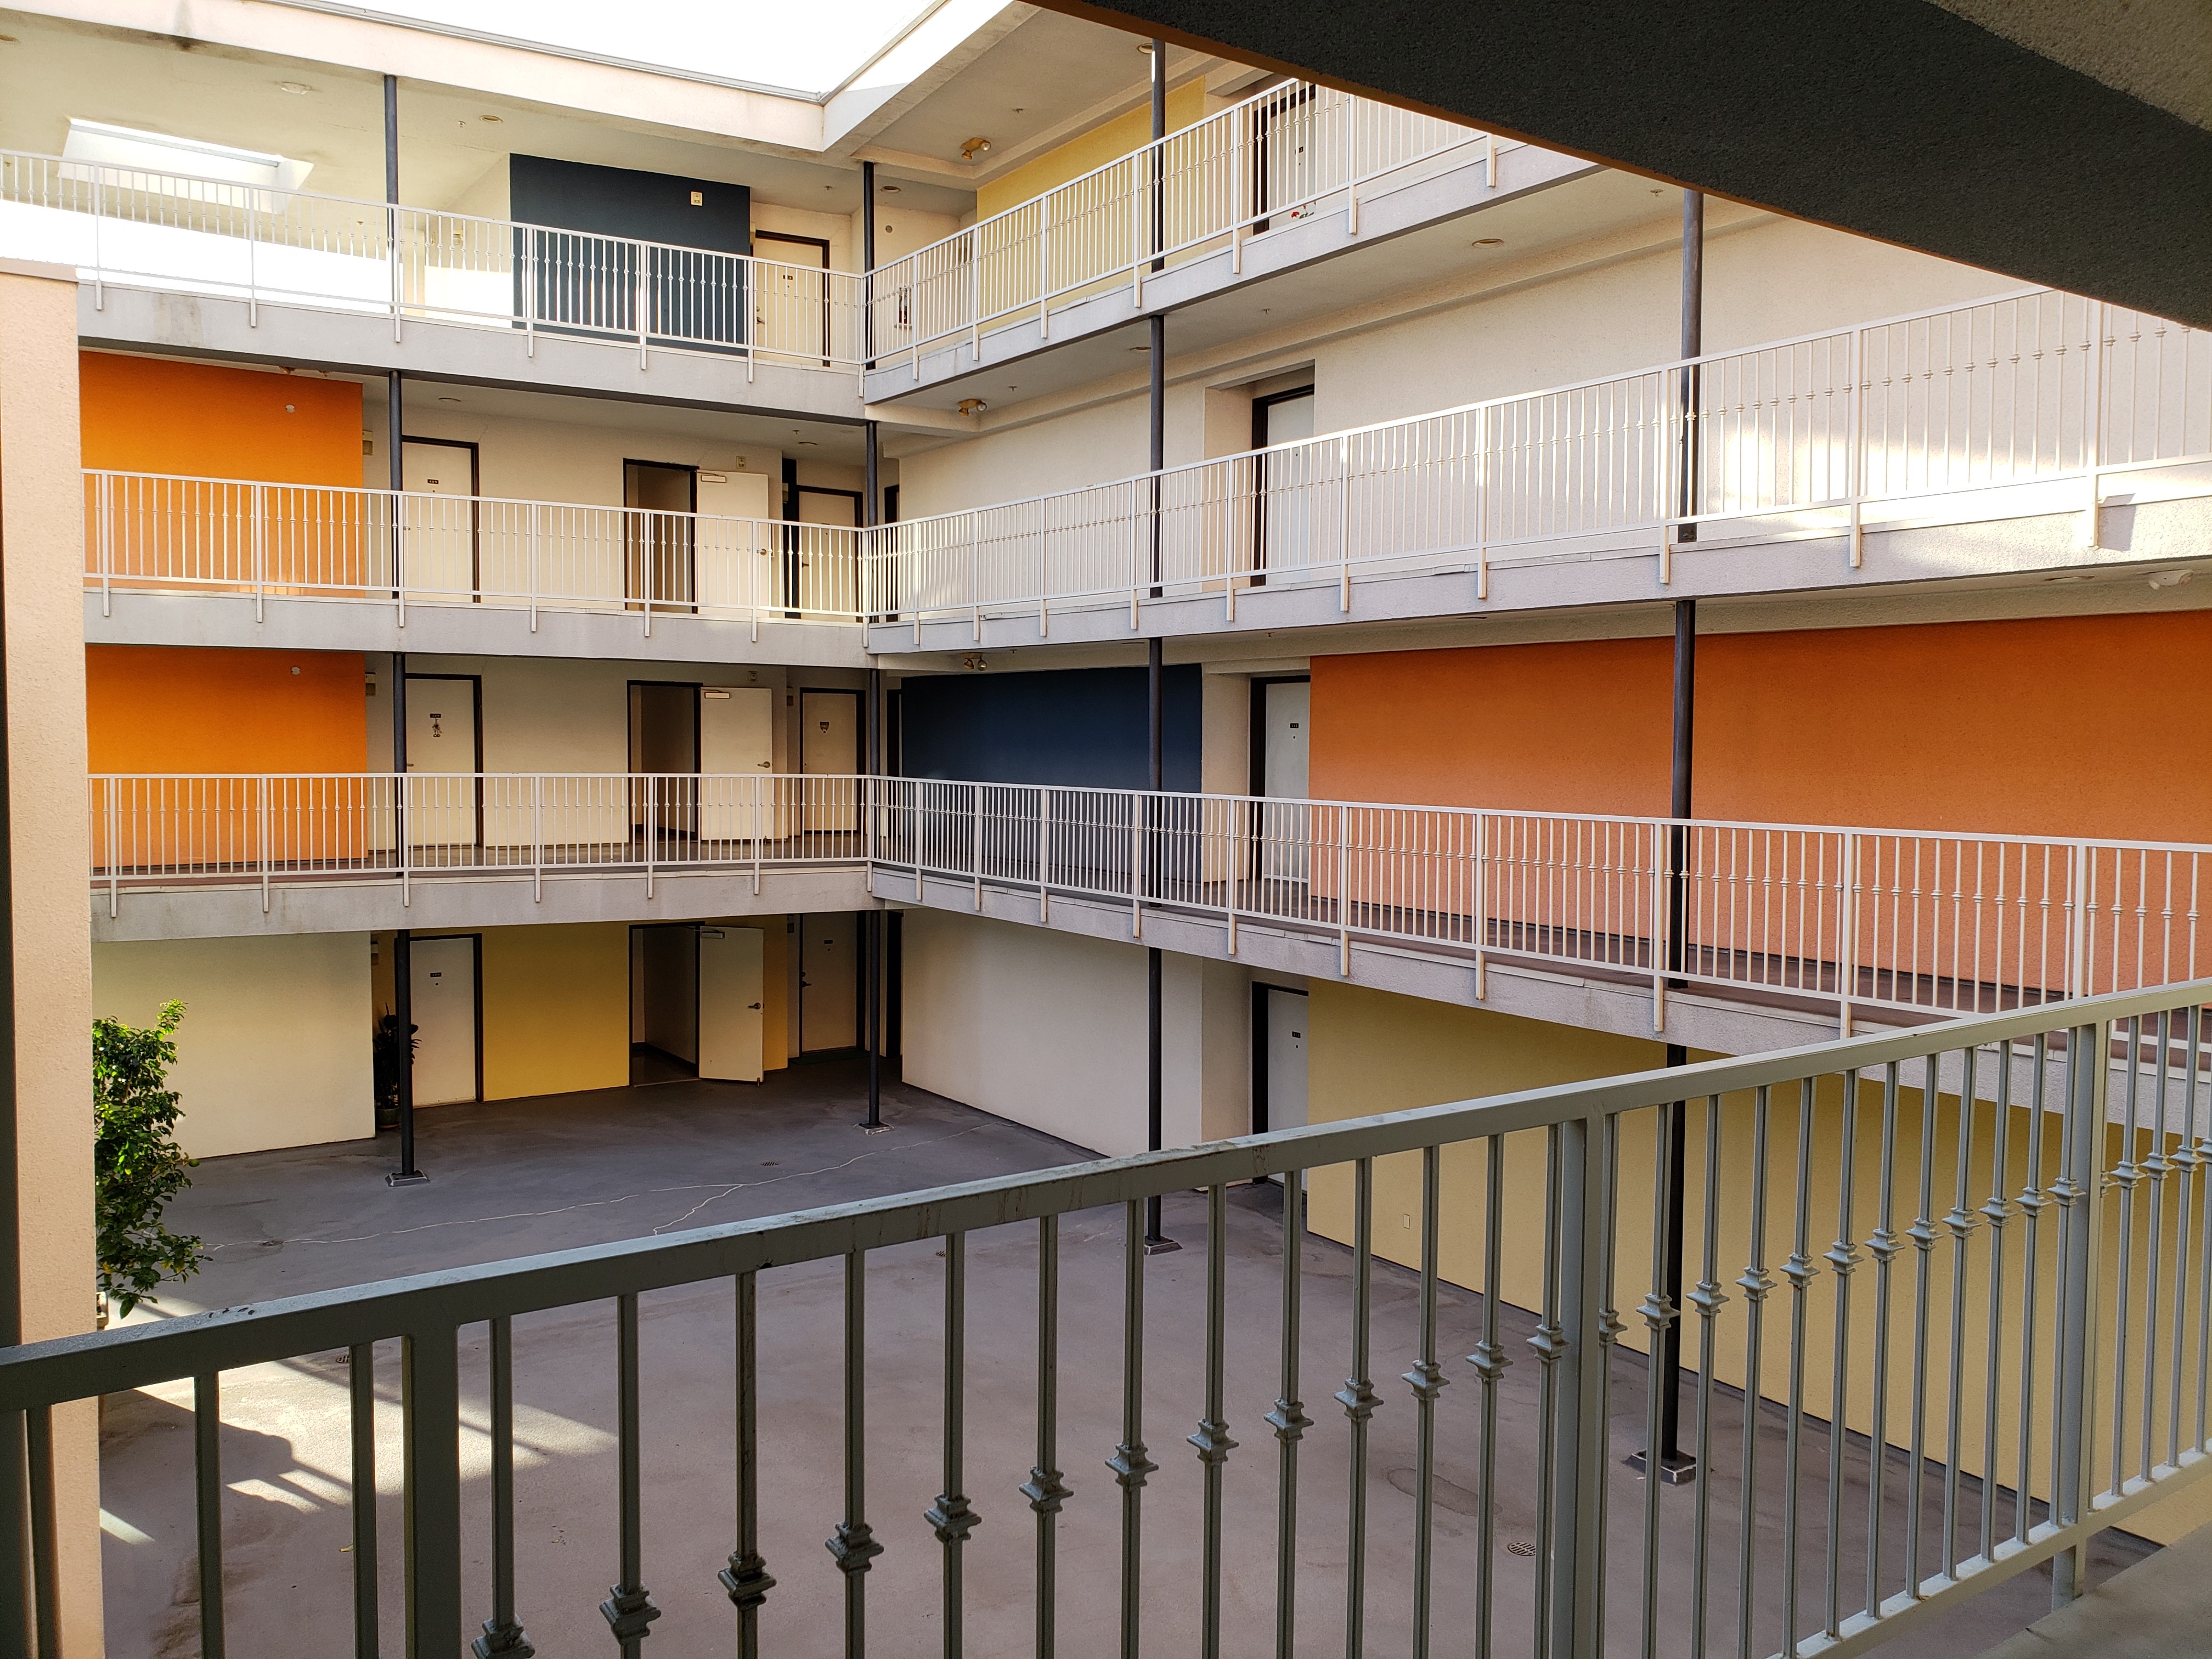 Inner view of a fourt story building. Pictured is an open central space and outter passageways to units on each floor. Small white fences are aligned on the outter section of the passageways.